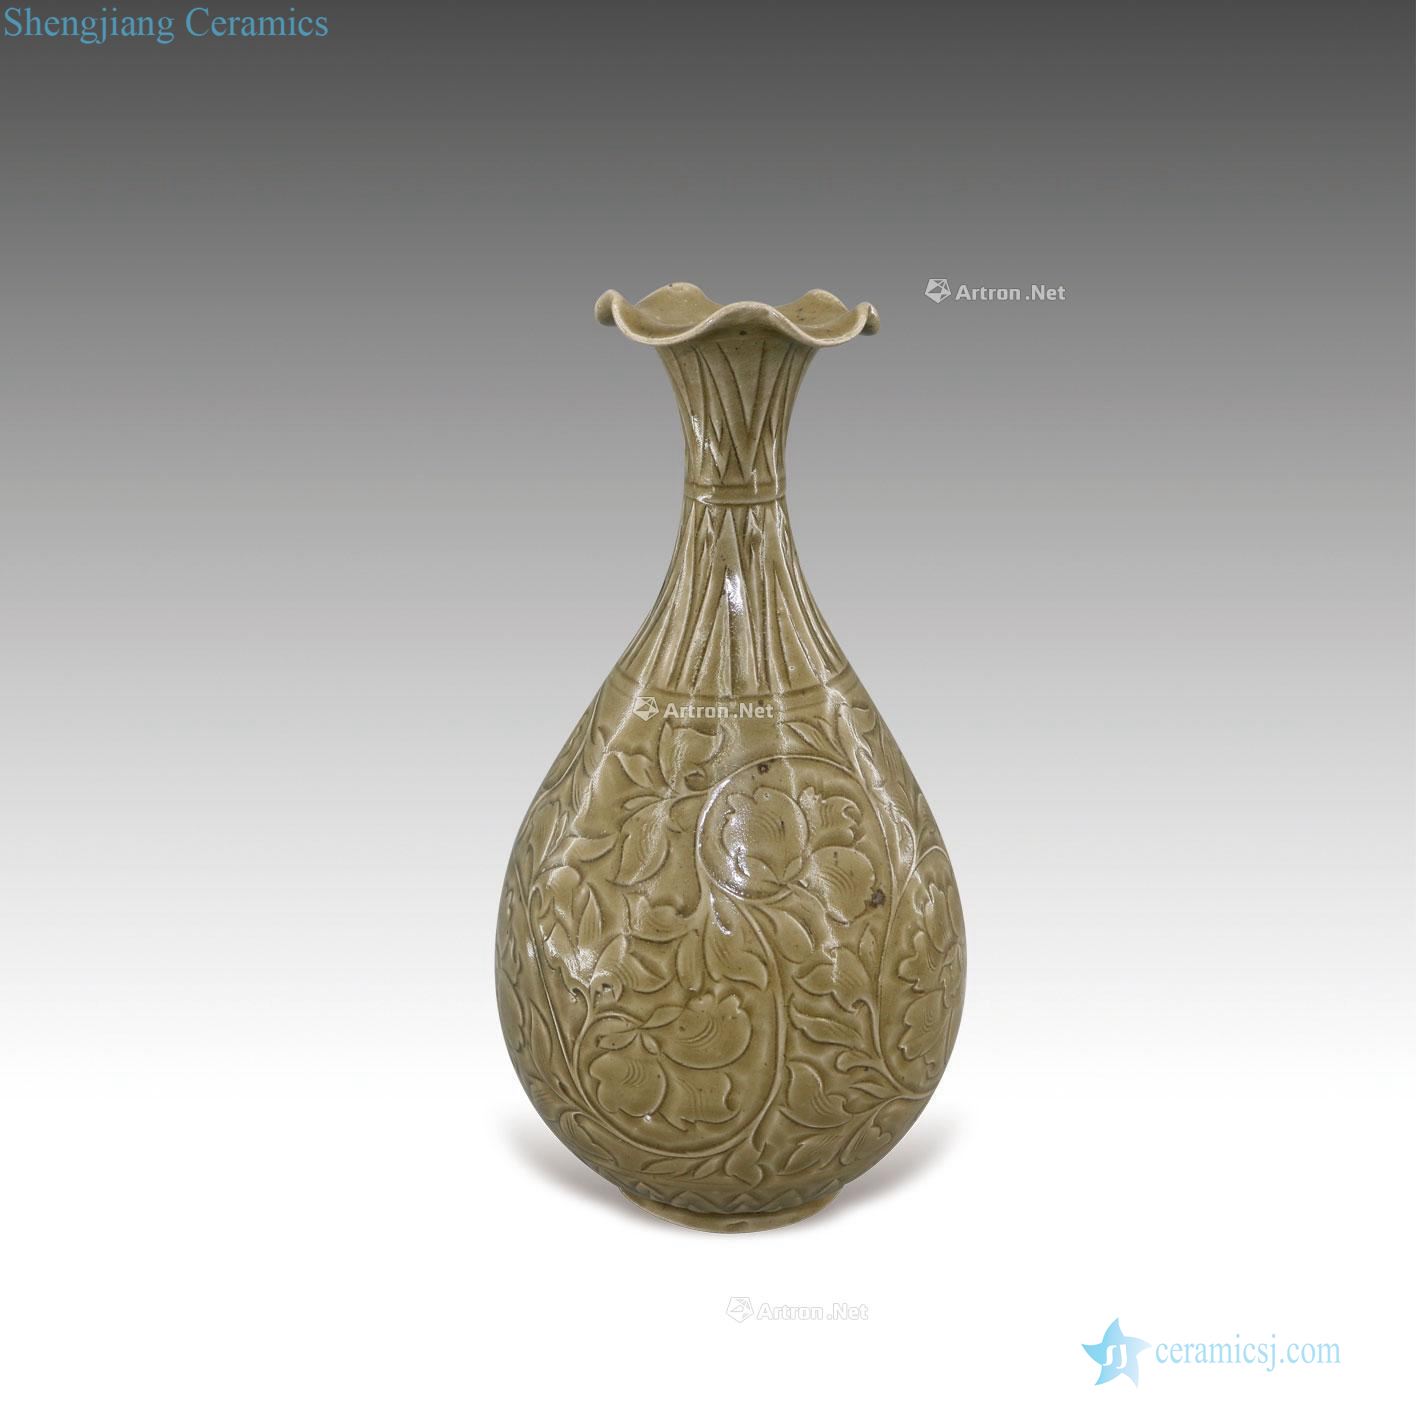 The song dynasty Yao state kiln carved okho spring bottle